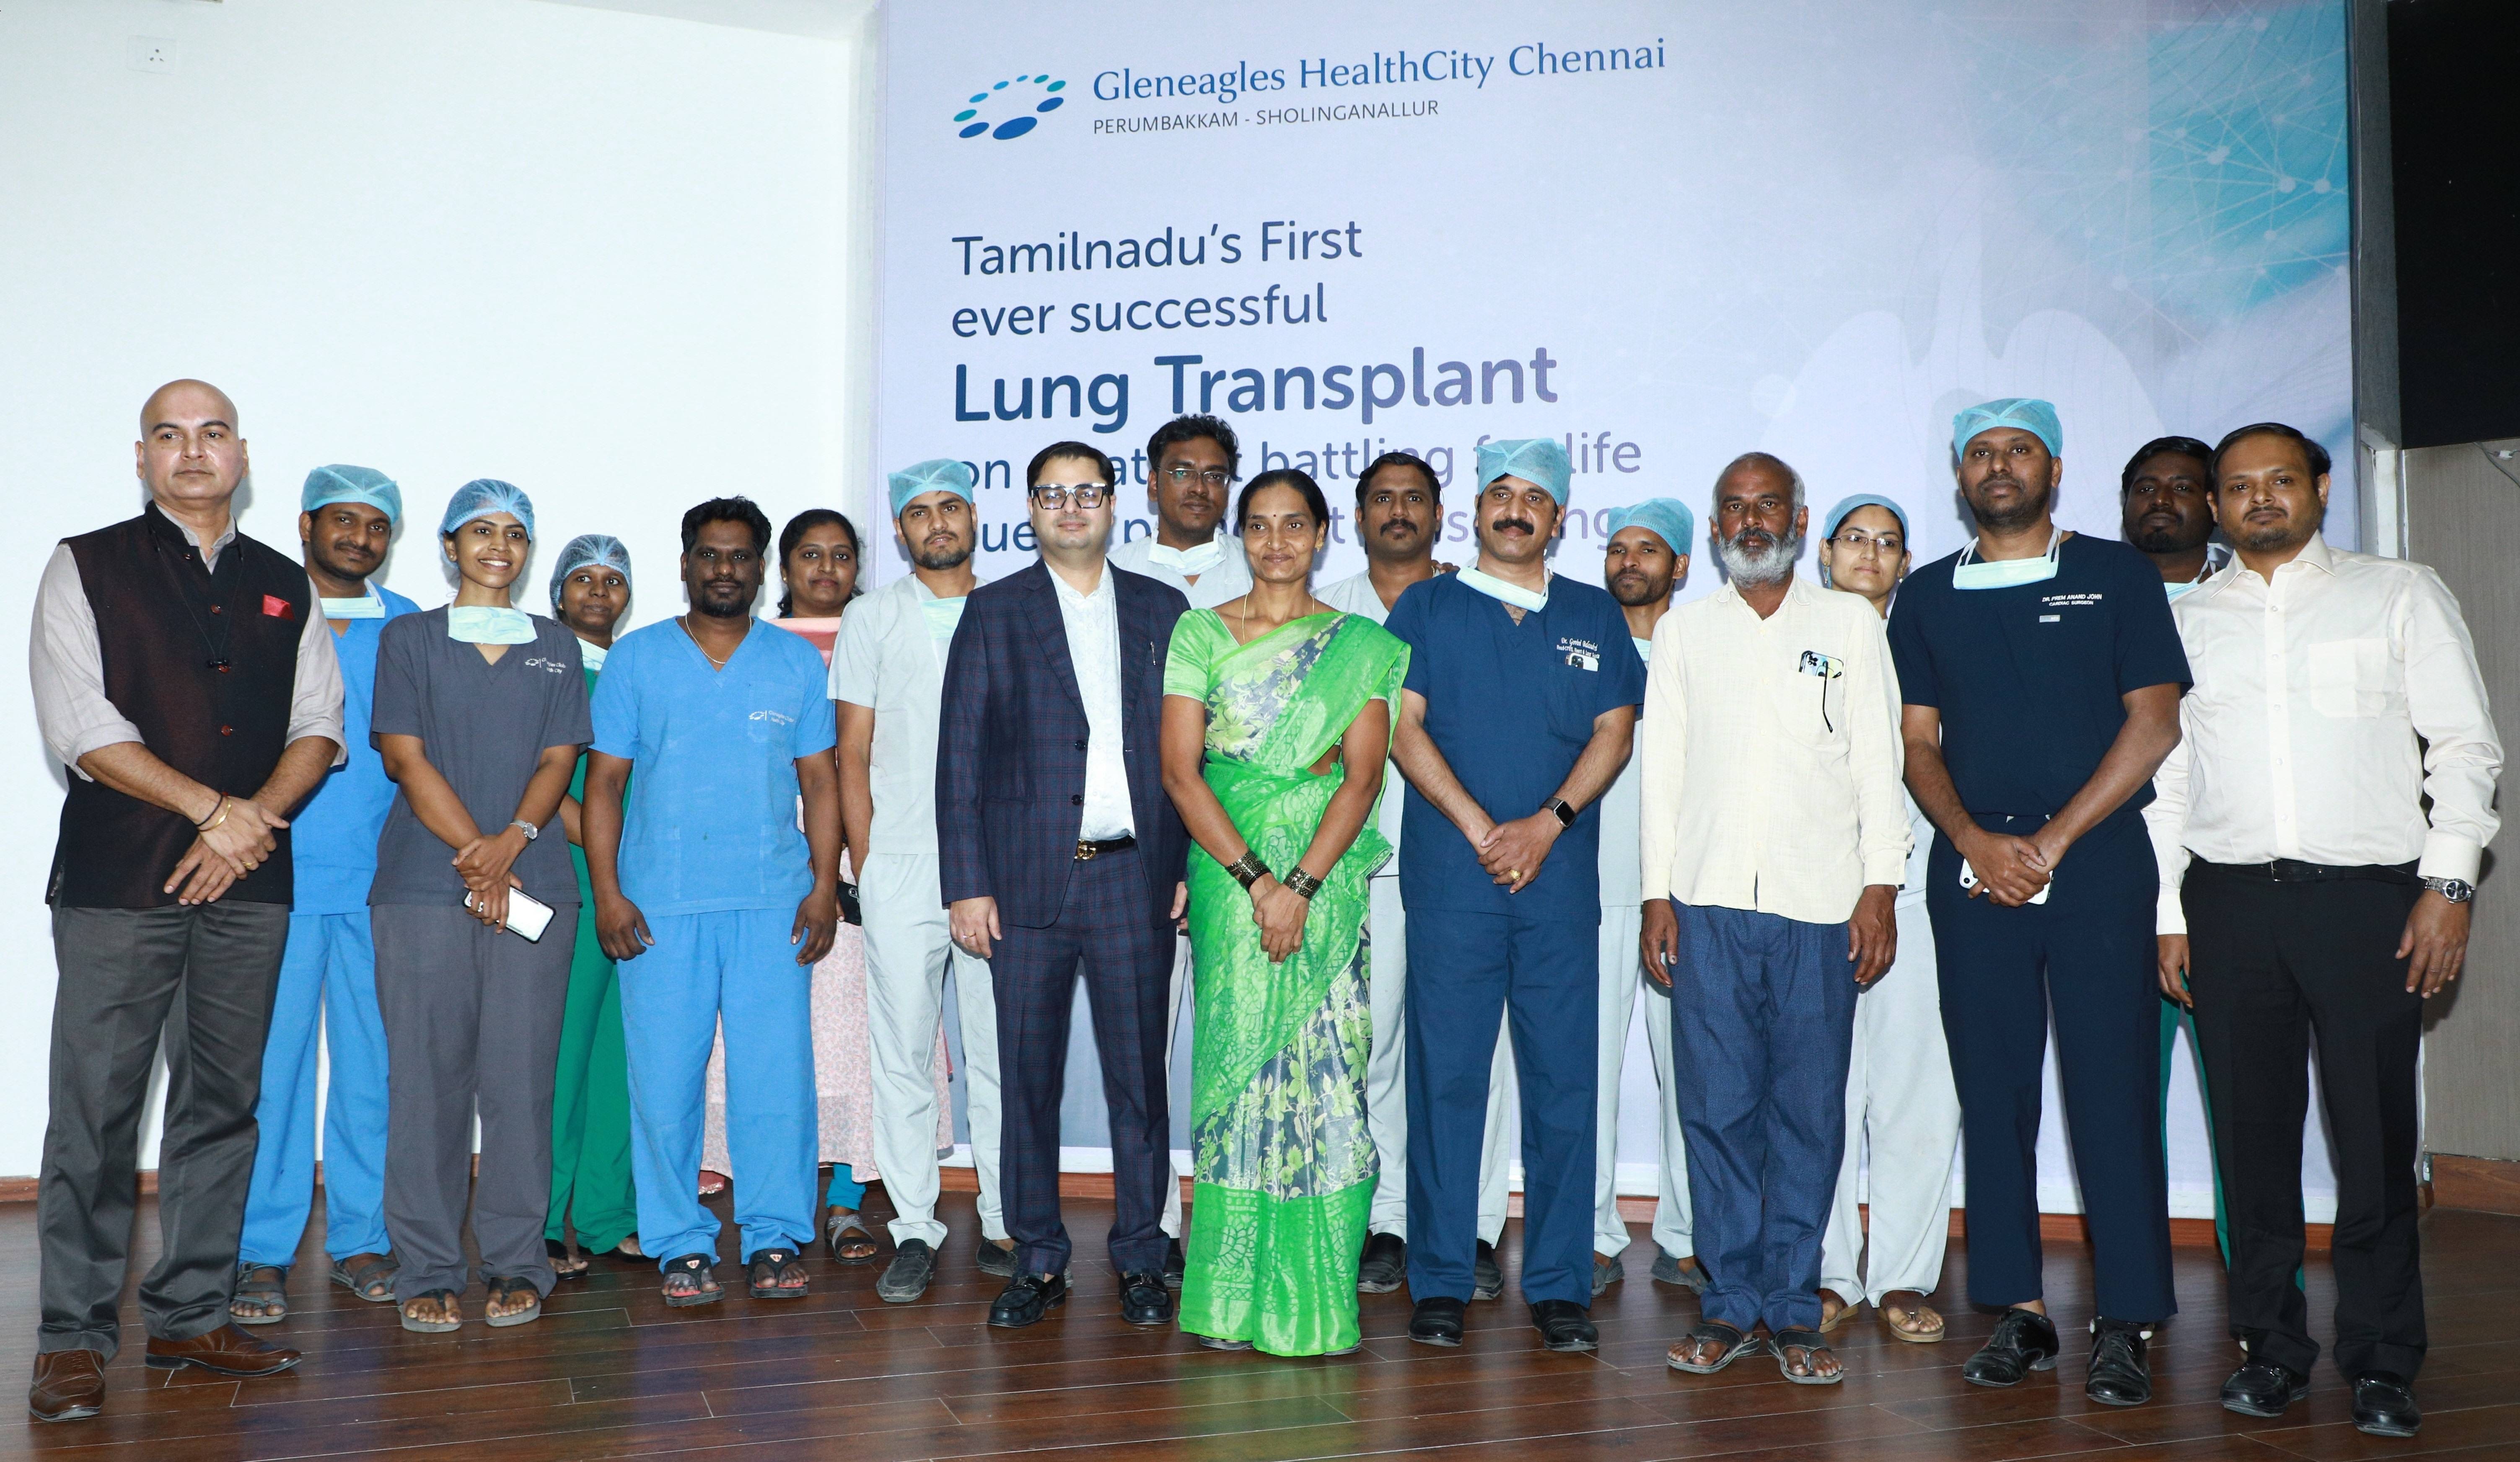 27-Year-Old Housewife Successfully Undergoes Lung Transplantation at Gleneagles Health City Chennai